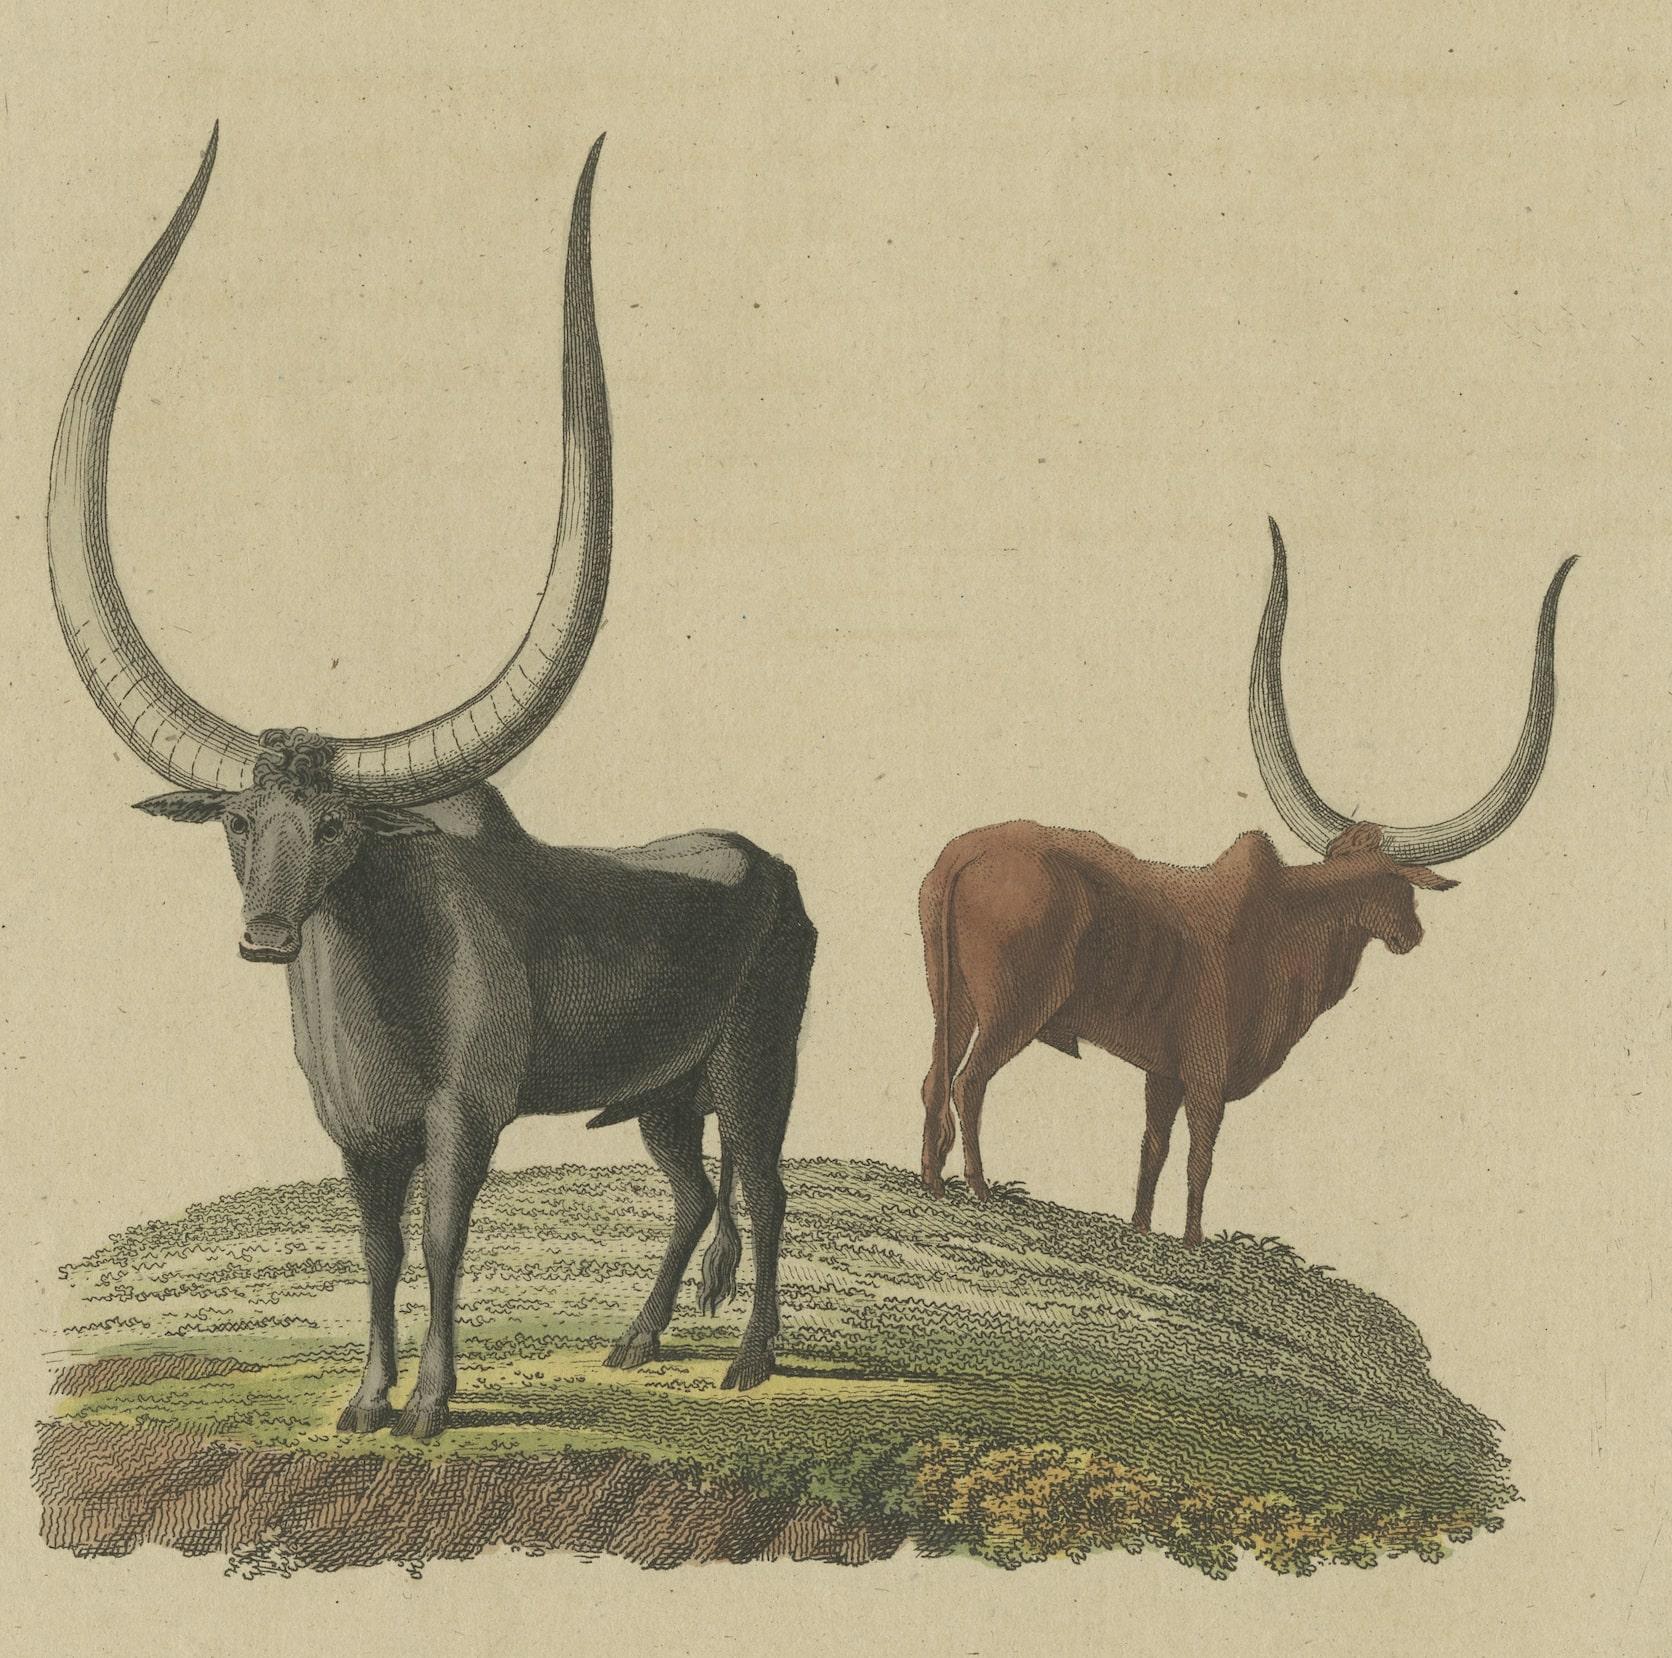 Original antique print of a Sanga ox (Bos Sanga Saltii). This print originates from 'Bilderbuch fur Kinder' by F.J. Bertuch. Friedrich Johann Bertuch (1747-1822) was a German publisher and man of arts most famous for his 12-volume encyclopedia for